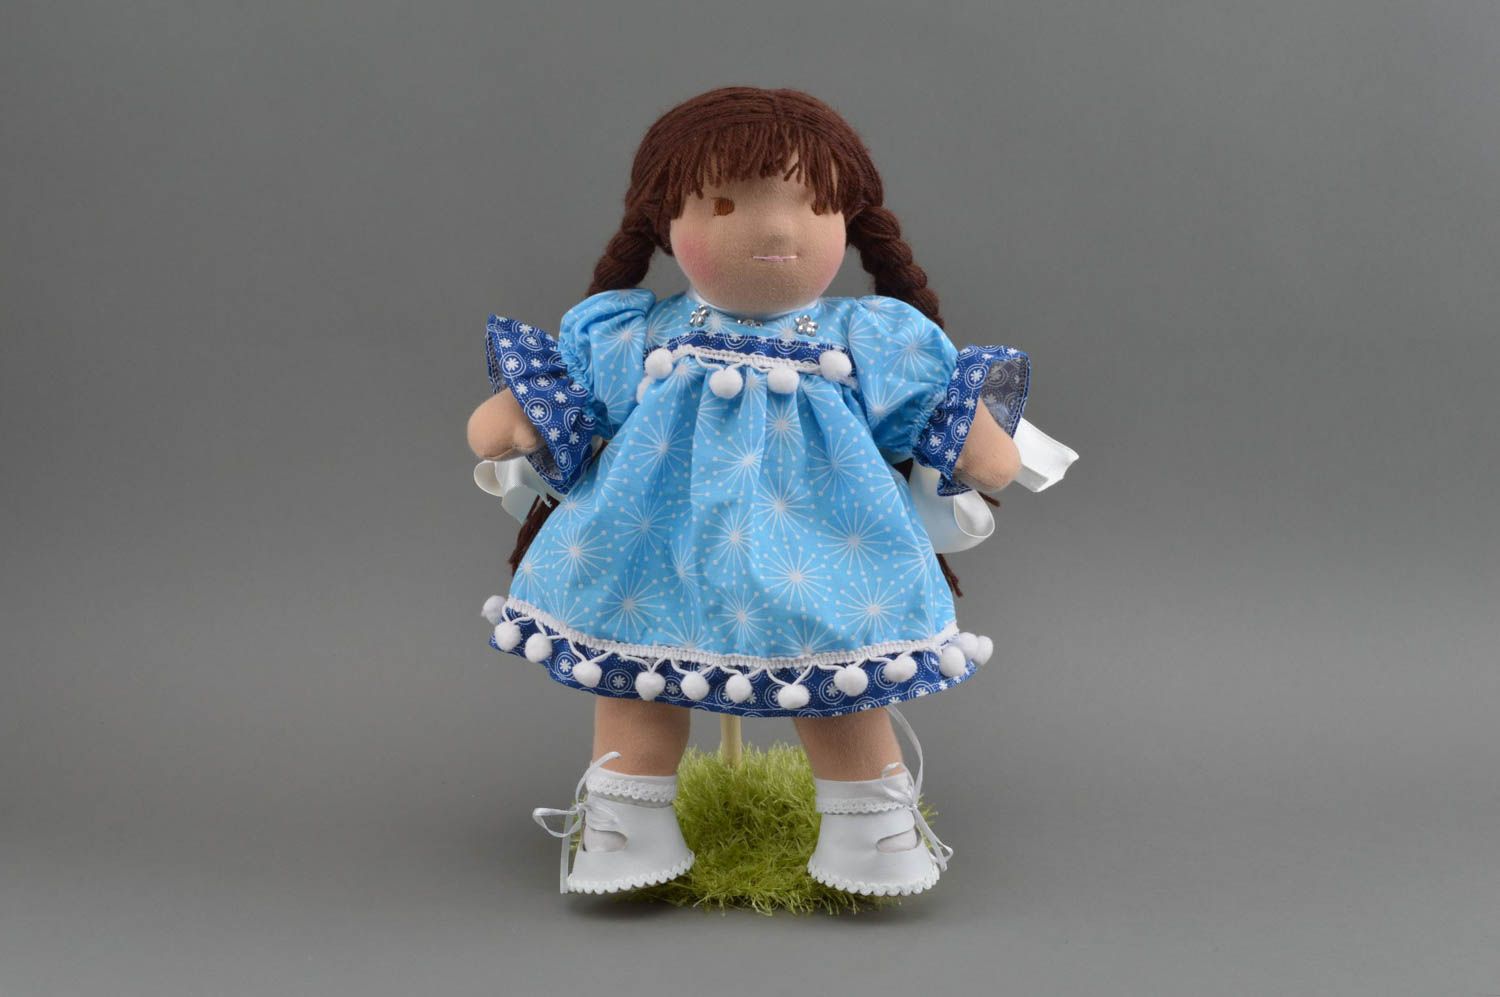 Beautiful toy dress cotton blue clothes for dolls unusual dress for dolls photo 1